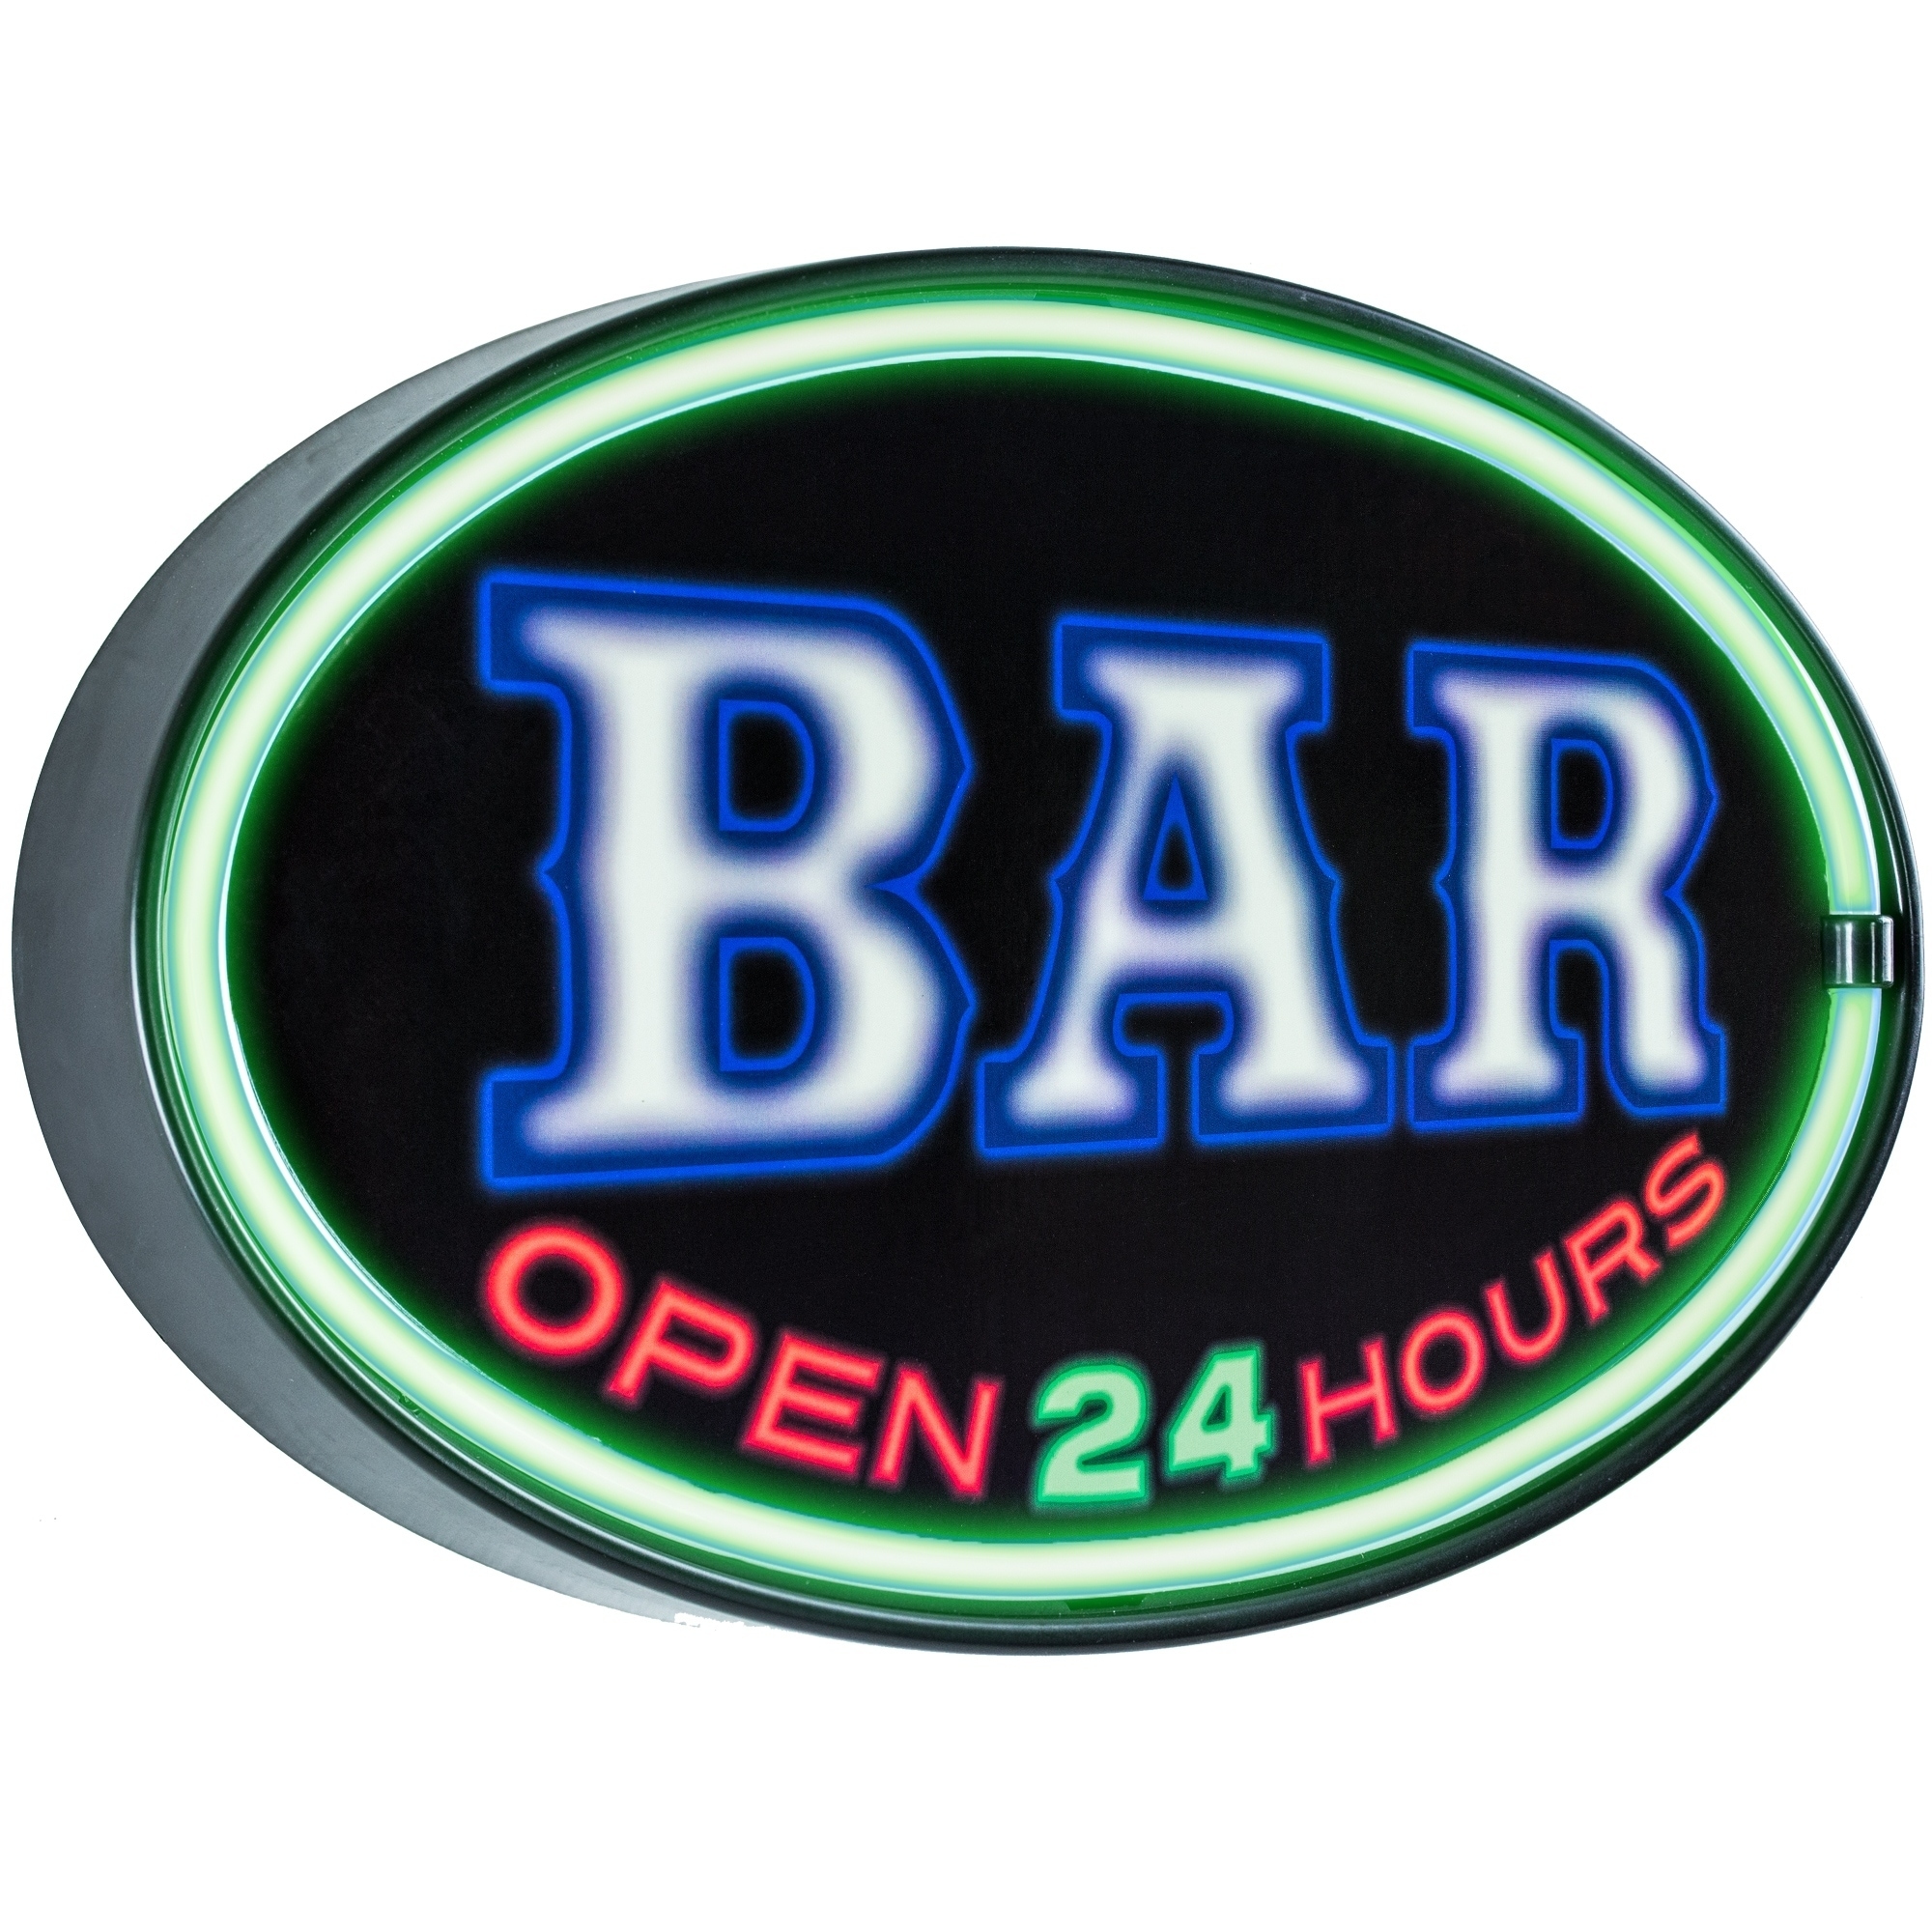 American Art Decor Bar Open 24 Hours Oval Shaped LED Light Up Sign Wall  Decor for Man Cave Bar Garage On Sale Bed Bath  Beyond 22158069